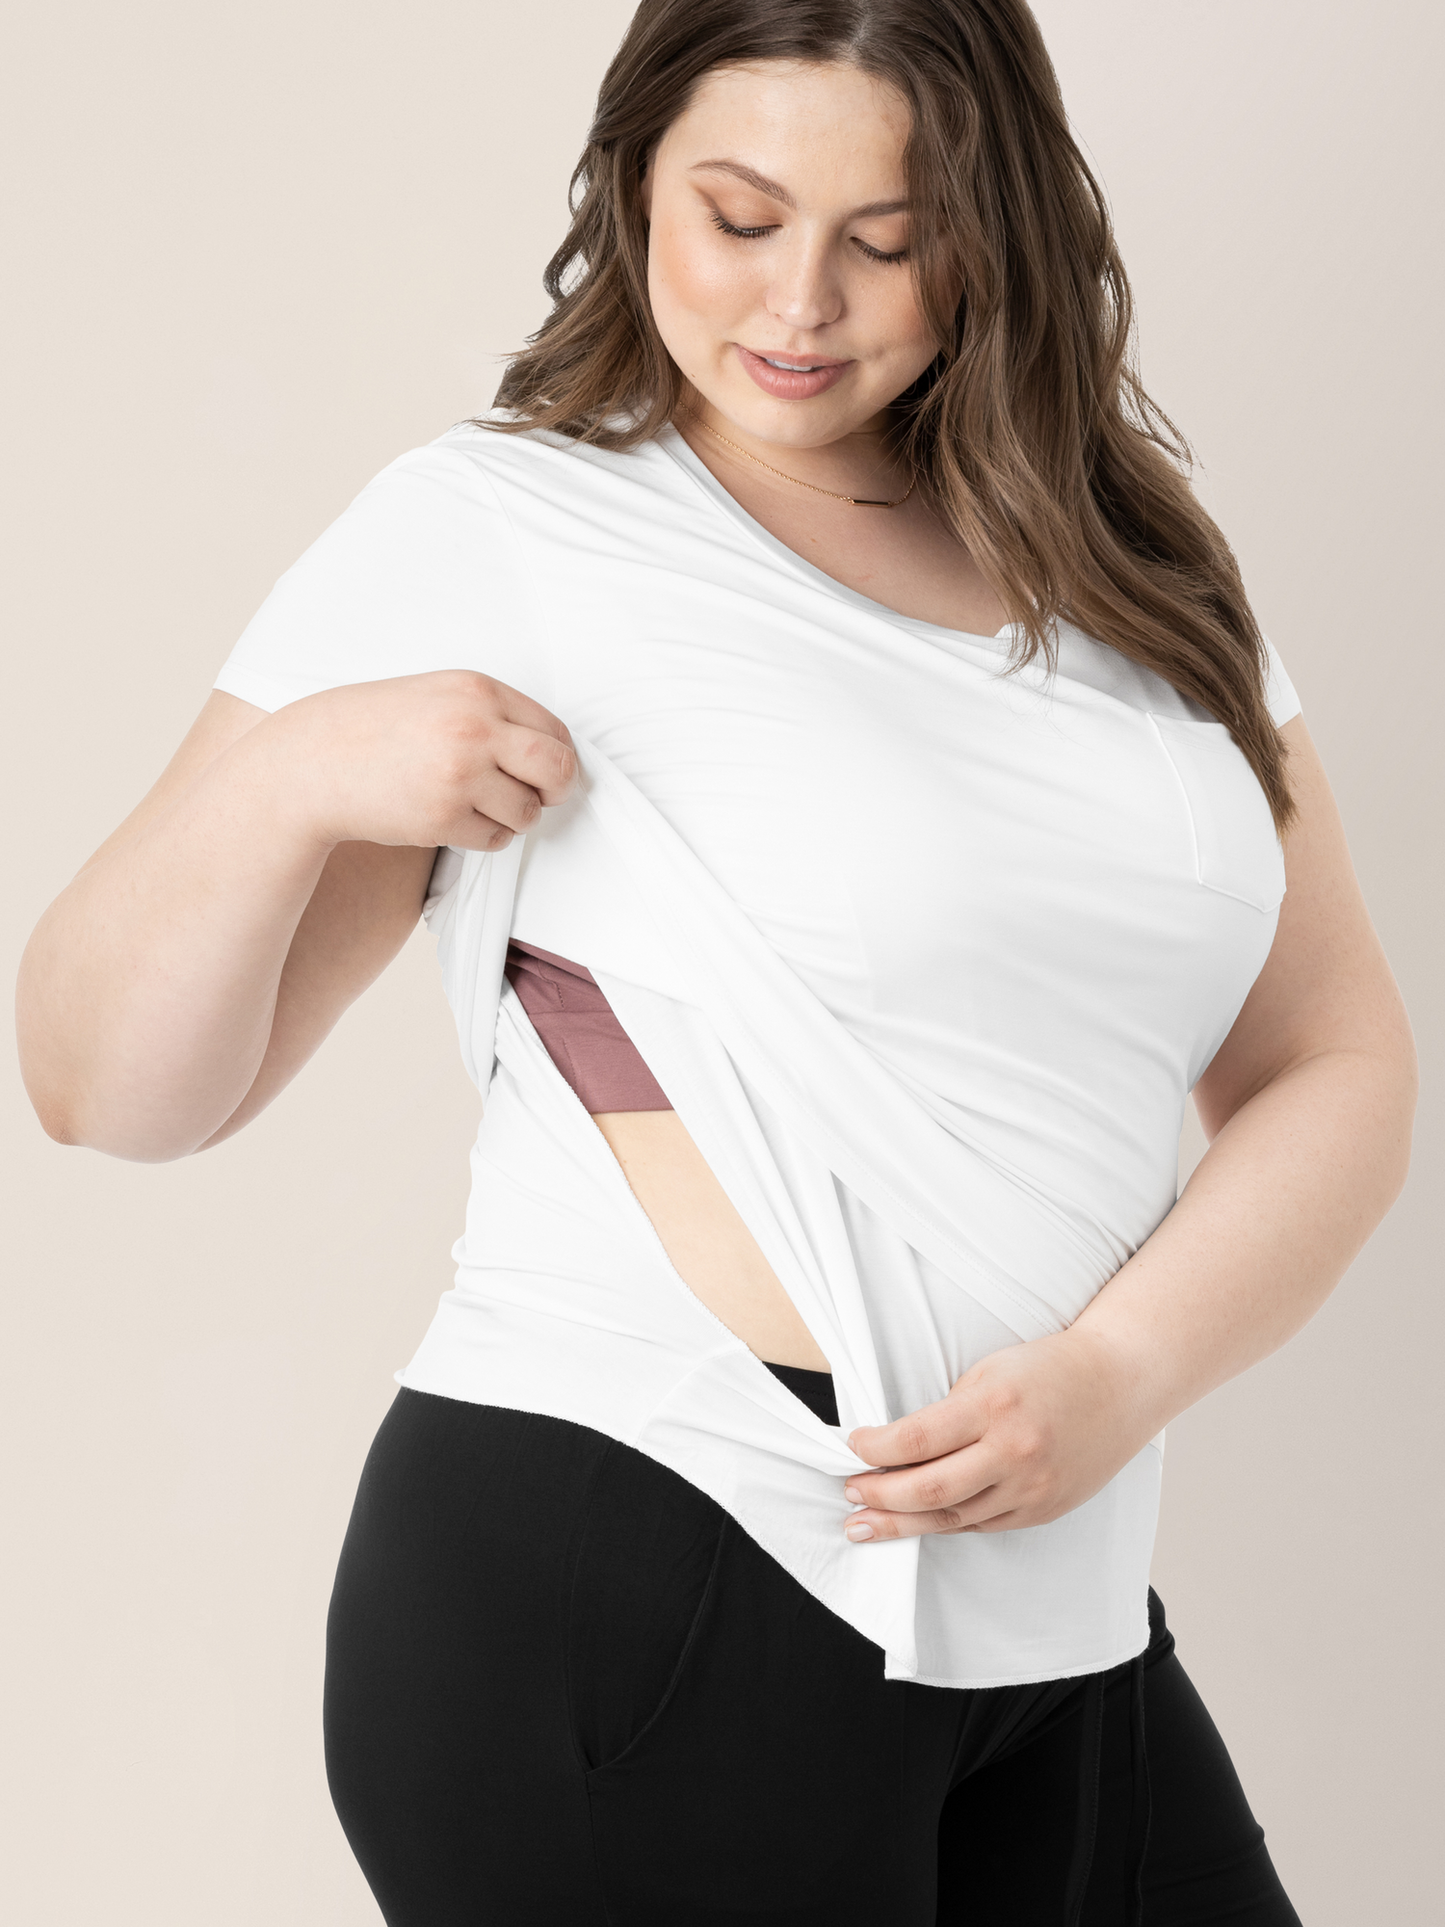 Model wearing the Everyday Maternity & Nursing T-shirt in White showing the nursing access.